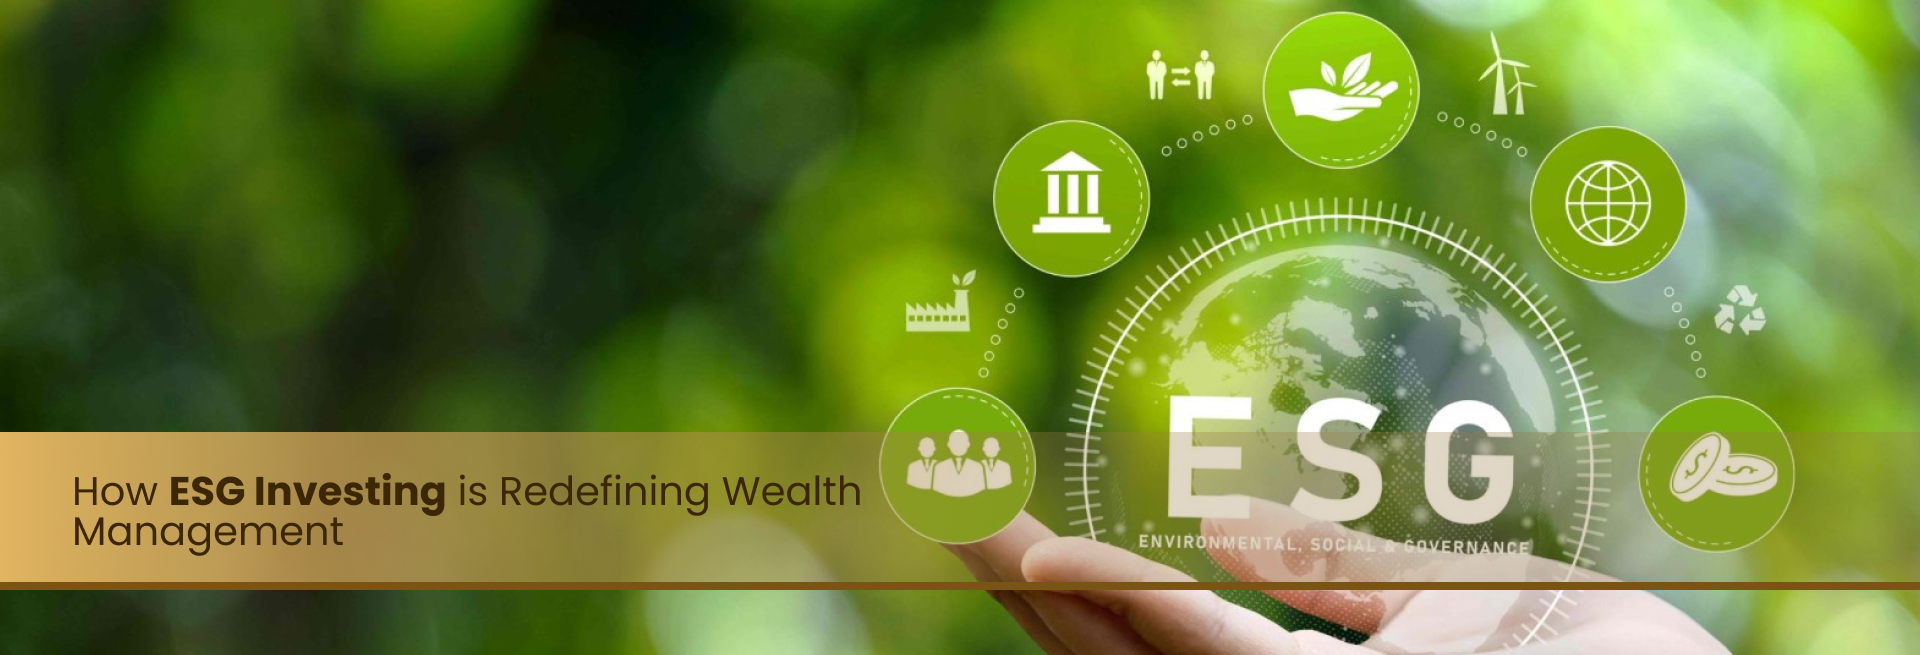 How ESG Investing is Redefining Wealth Management